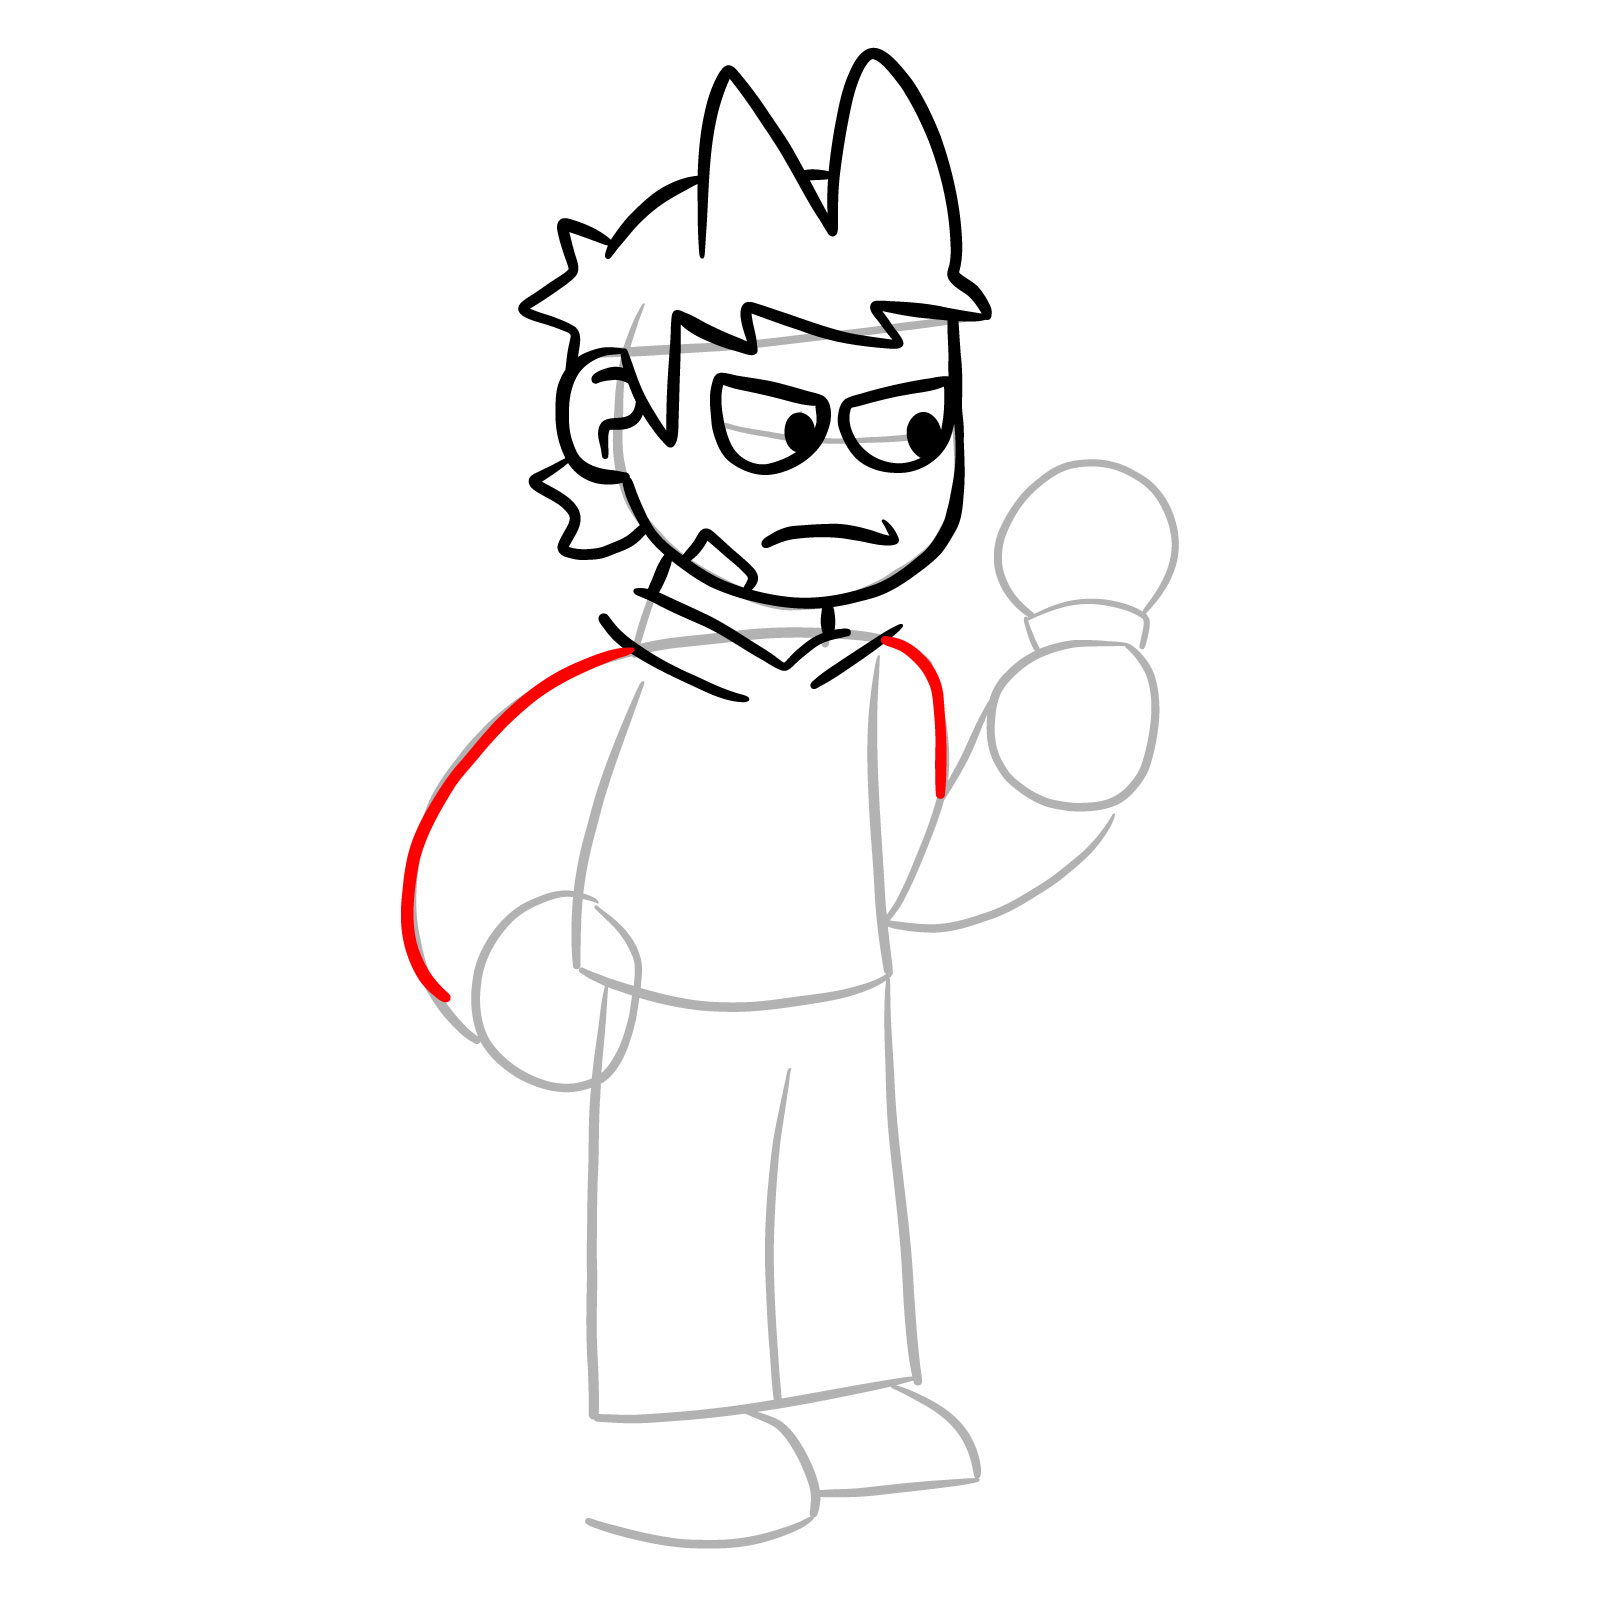 How to draw Tord from FNF - step 11